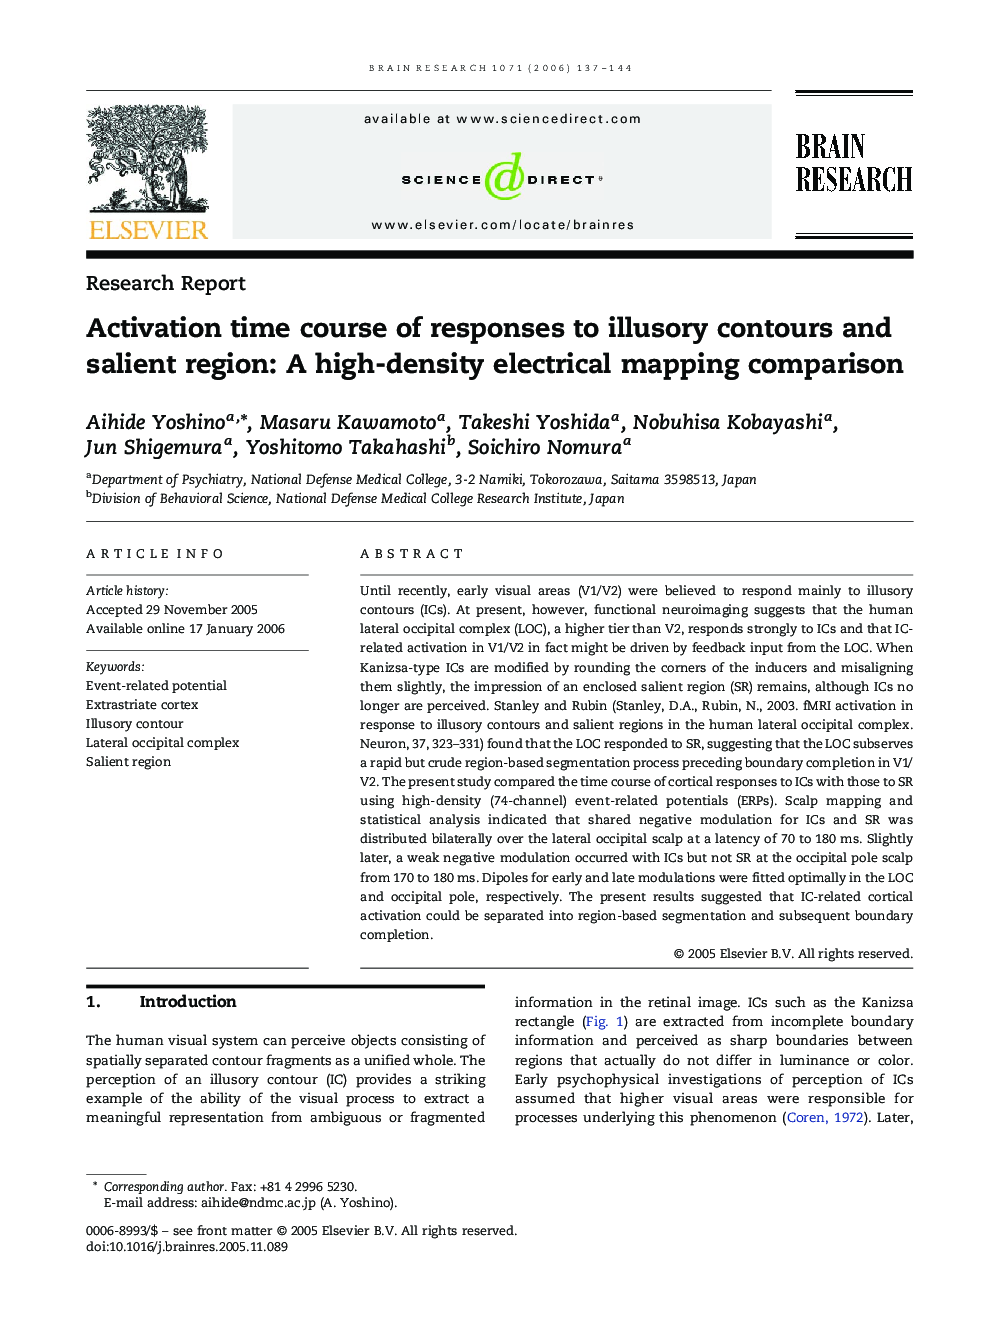 Activation time course of responses to illusory contours and salient region: A high-density electrical mapping comparison